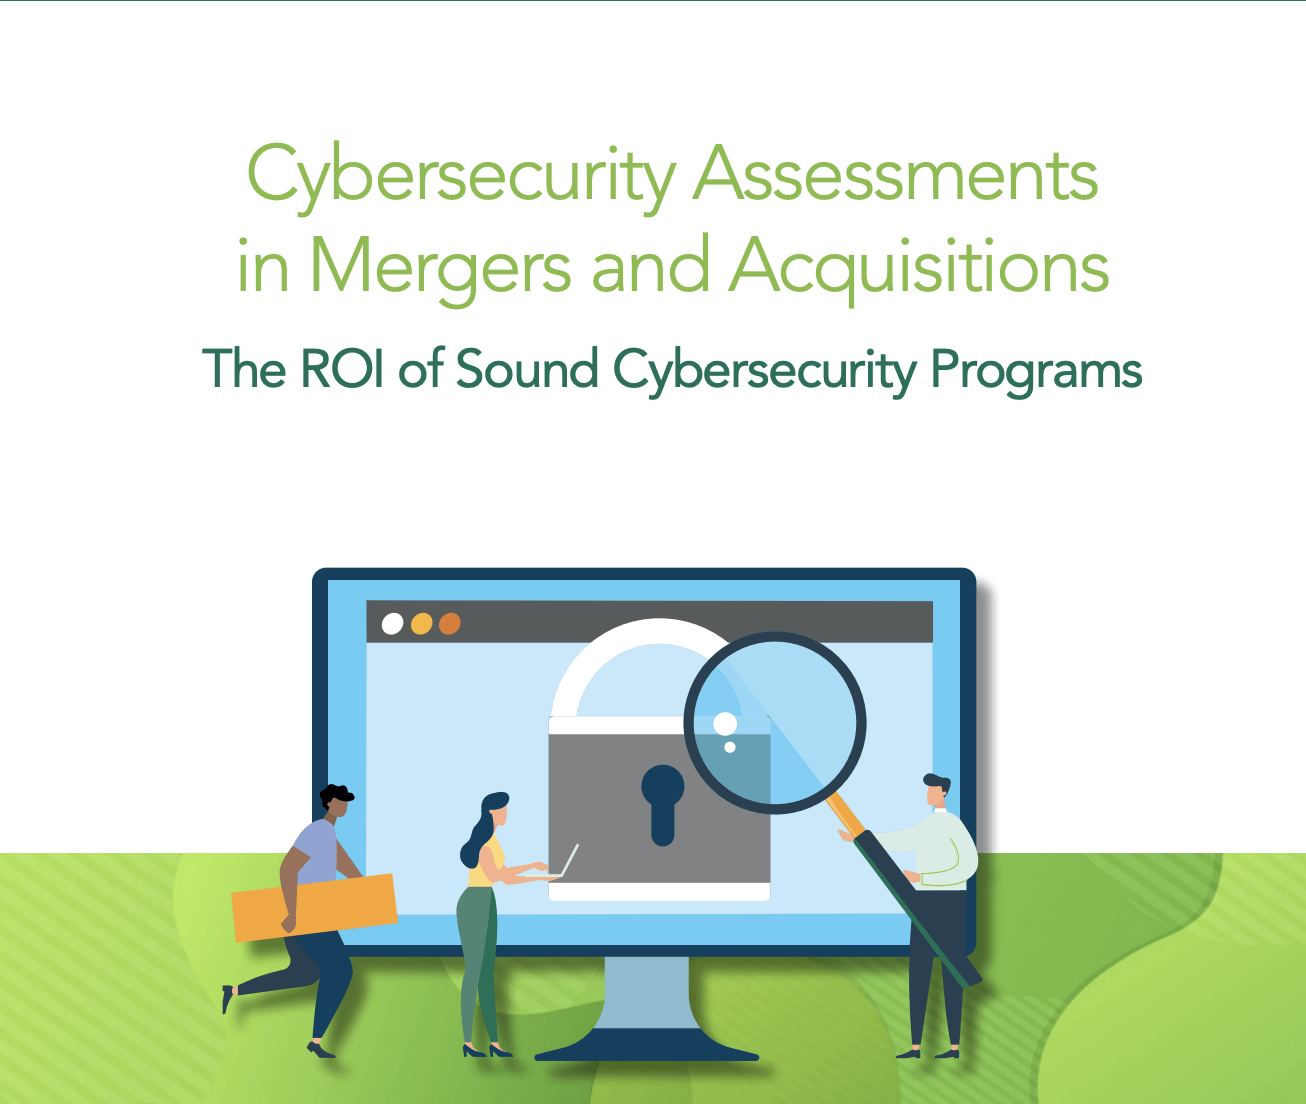 (ISC)² Report: Cybersecurity Assessments in Mergers & Acquisitions